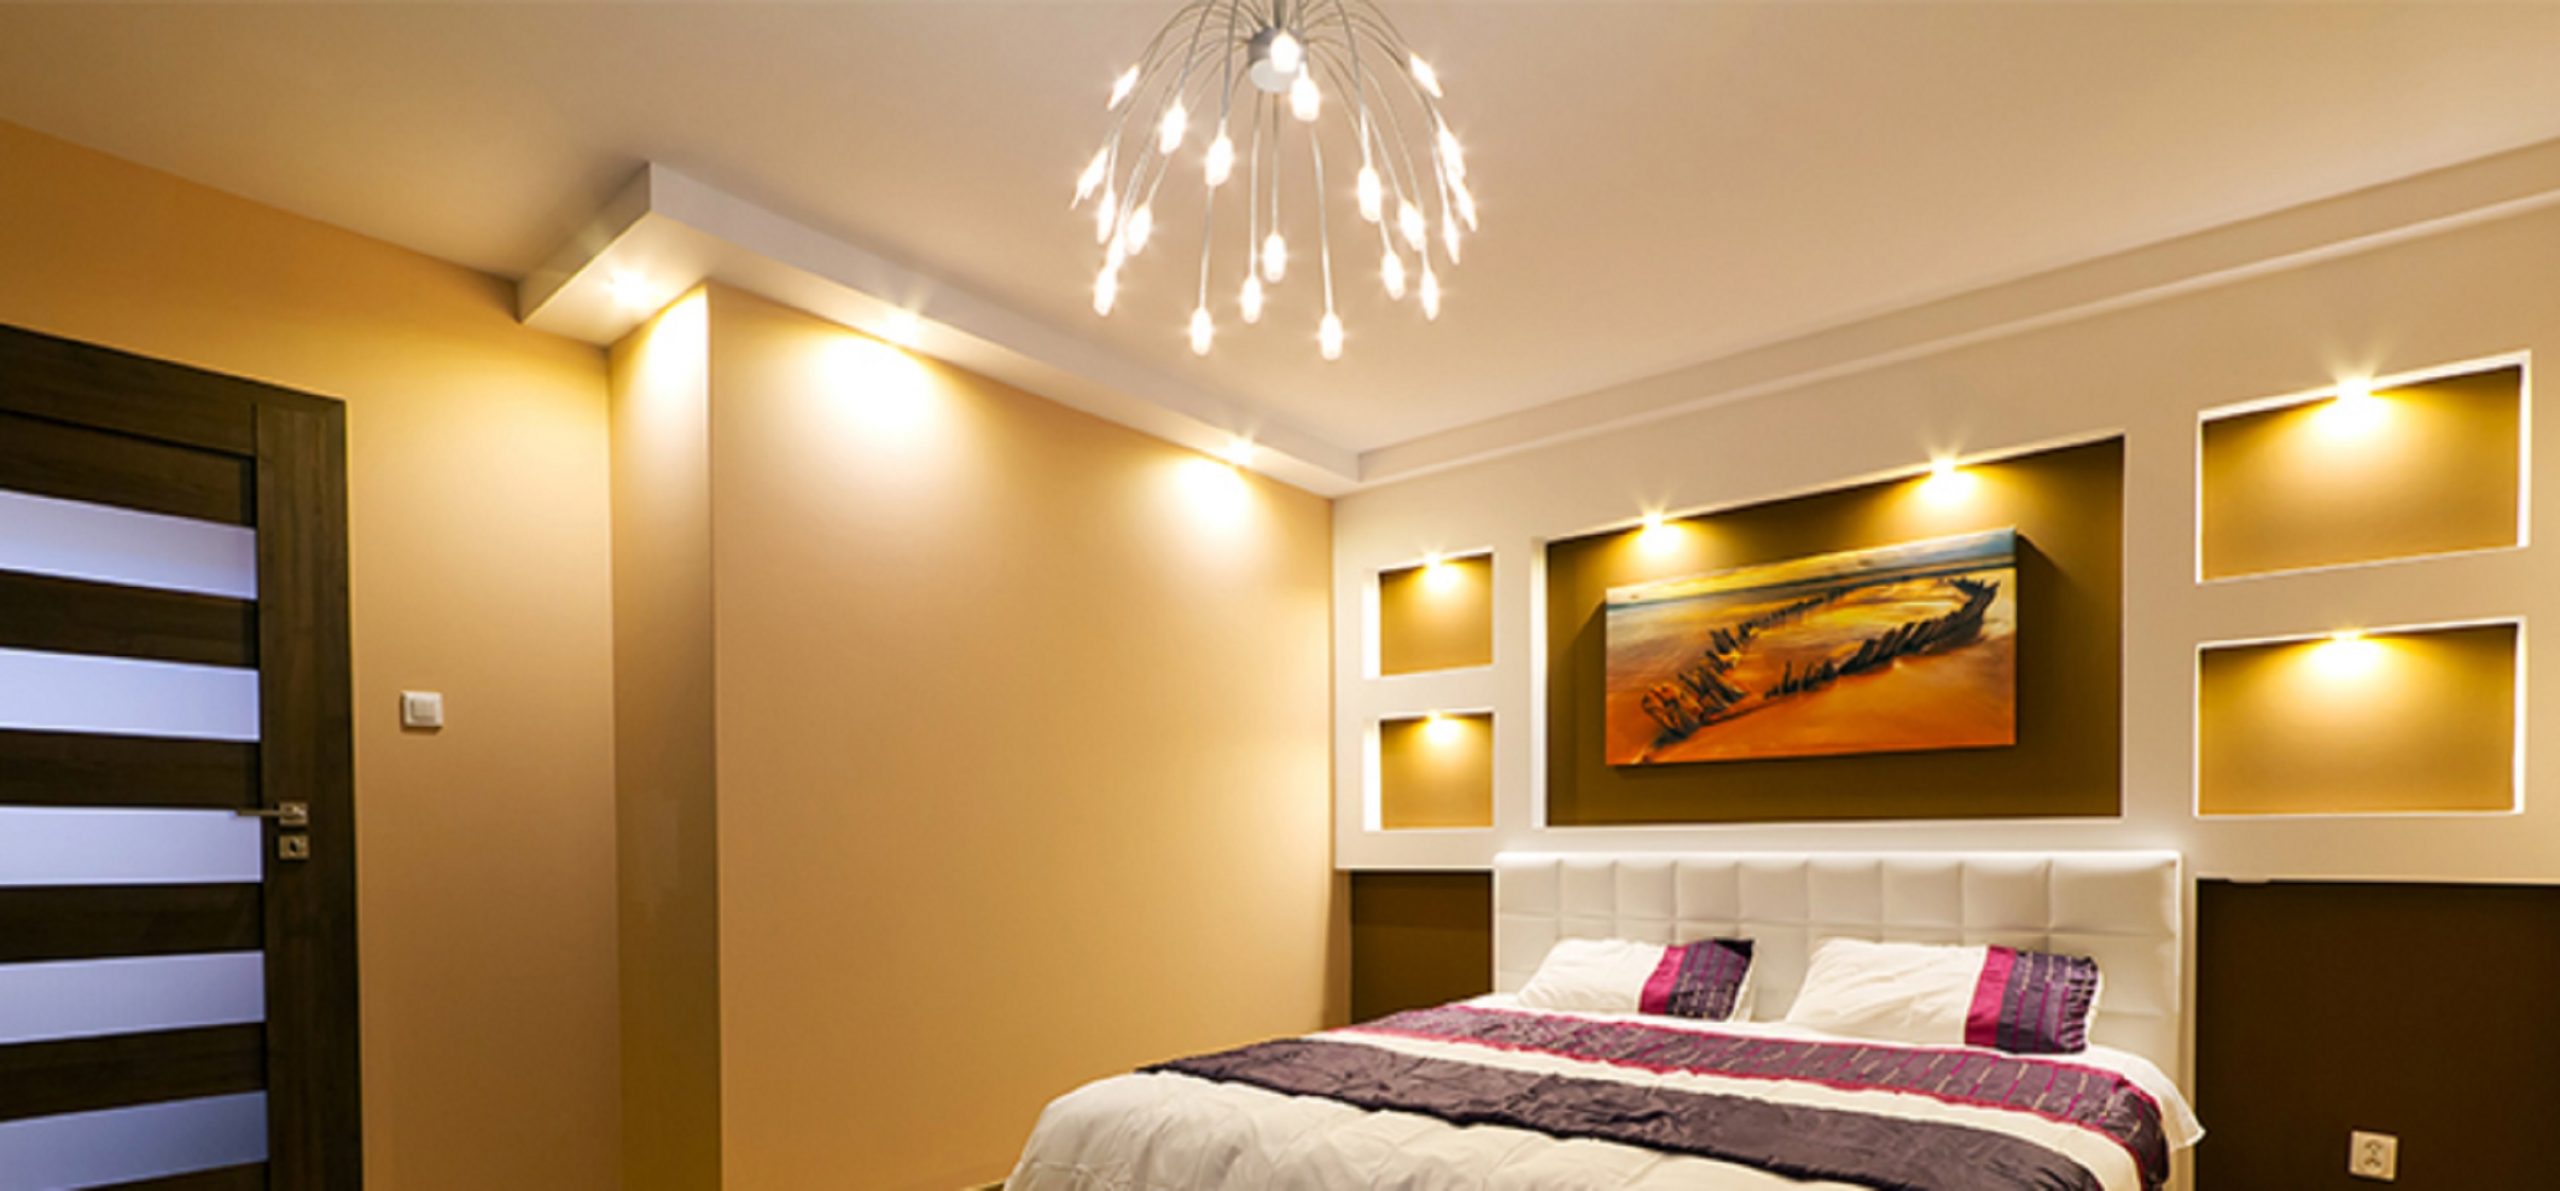 LED Lighting: Improved Approach towards Home Decoration